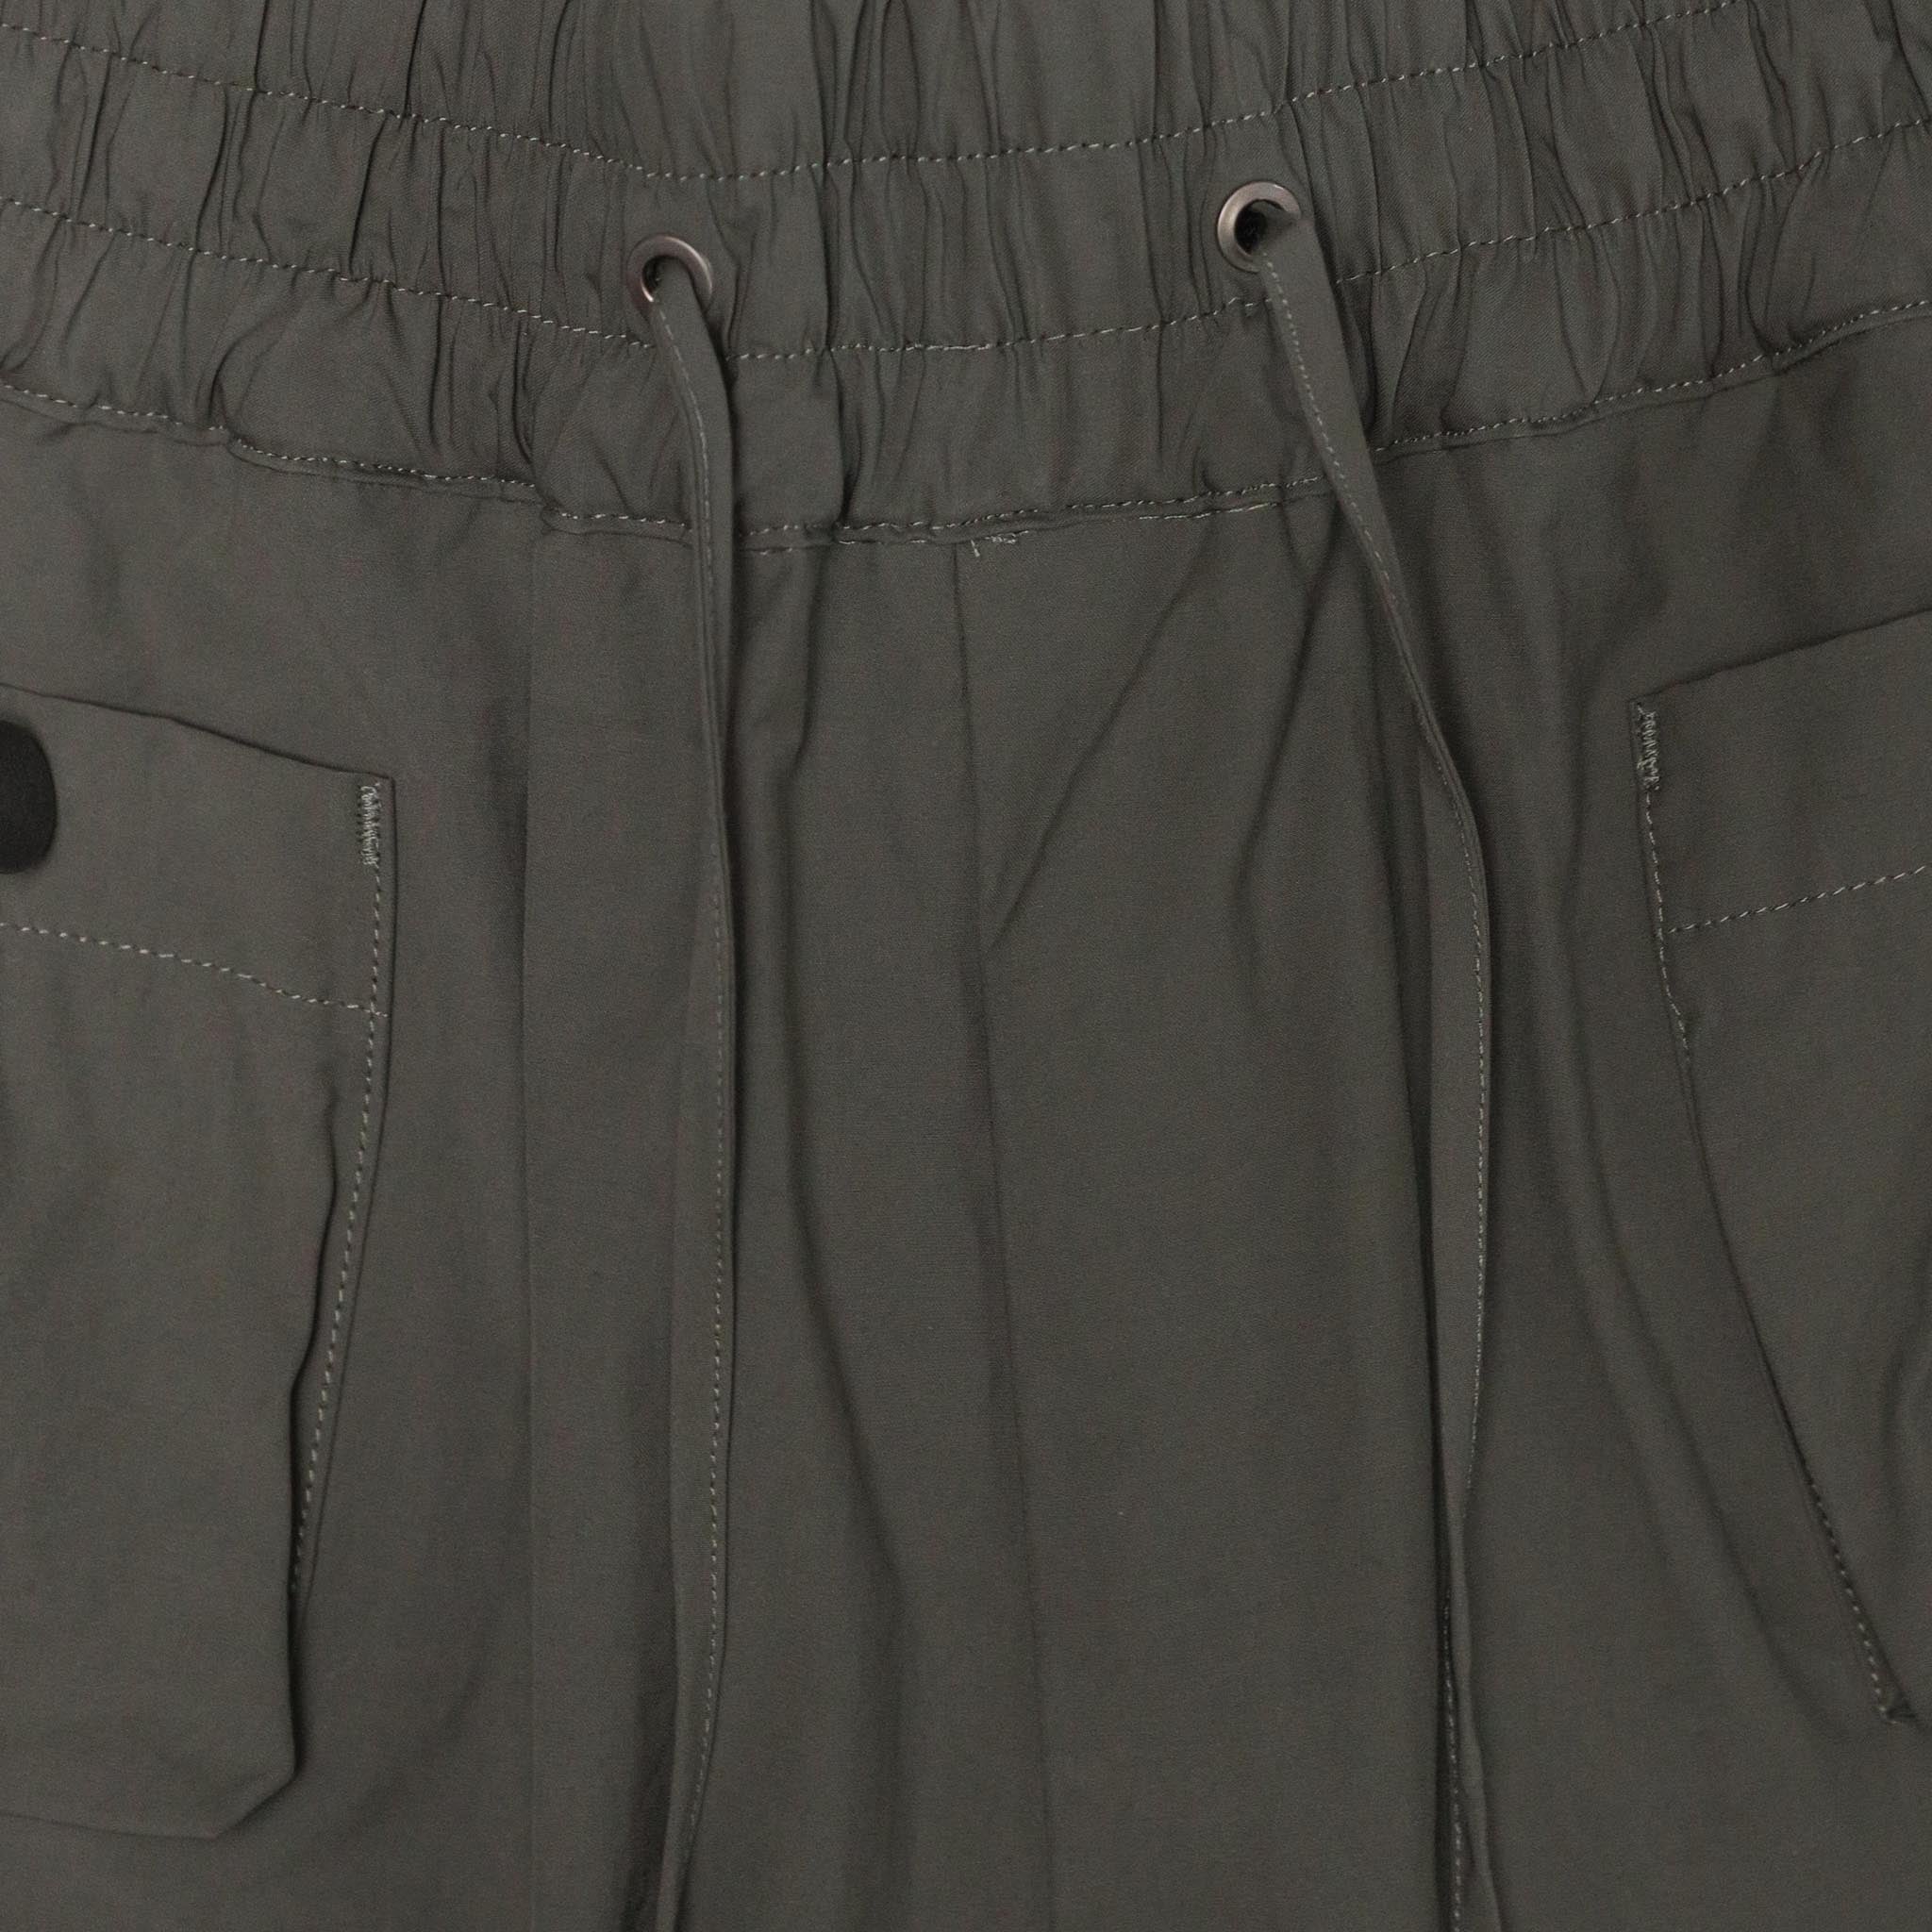 HOMME+ Cargo Short Charcoal